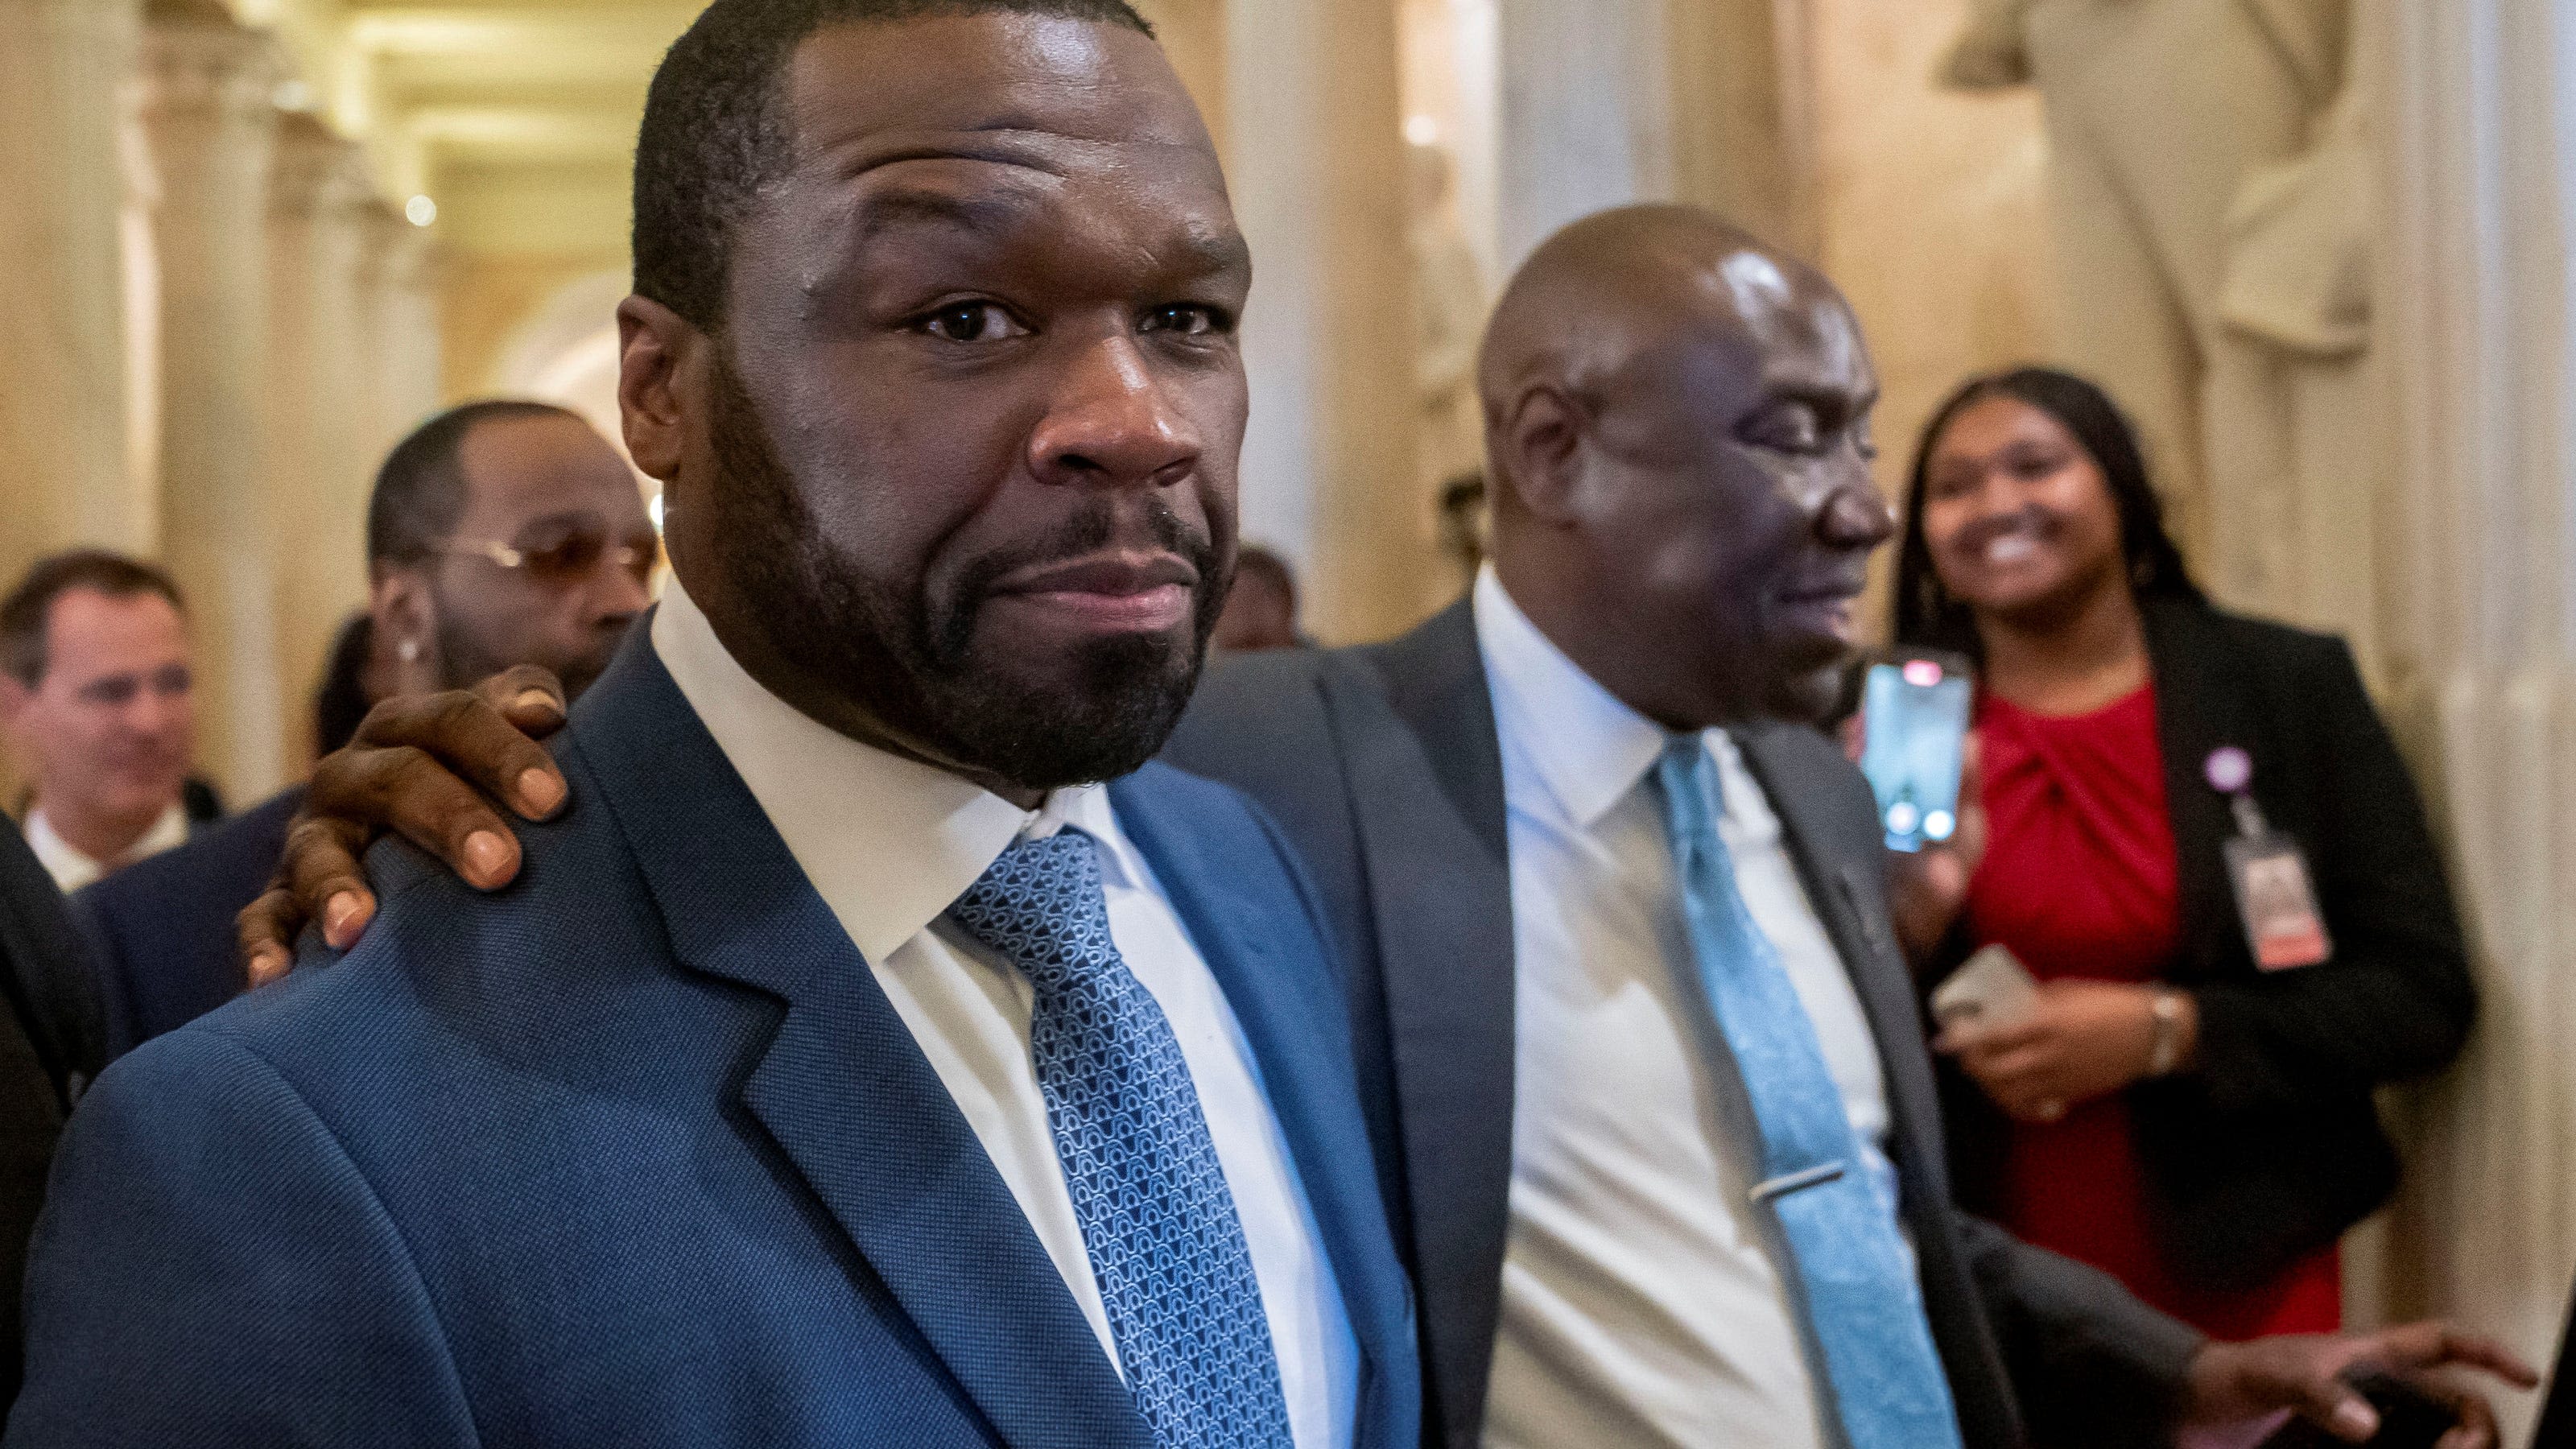 Why was 50 Cent on Capitol Hill? Rapper makes surprise visit